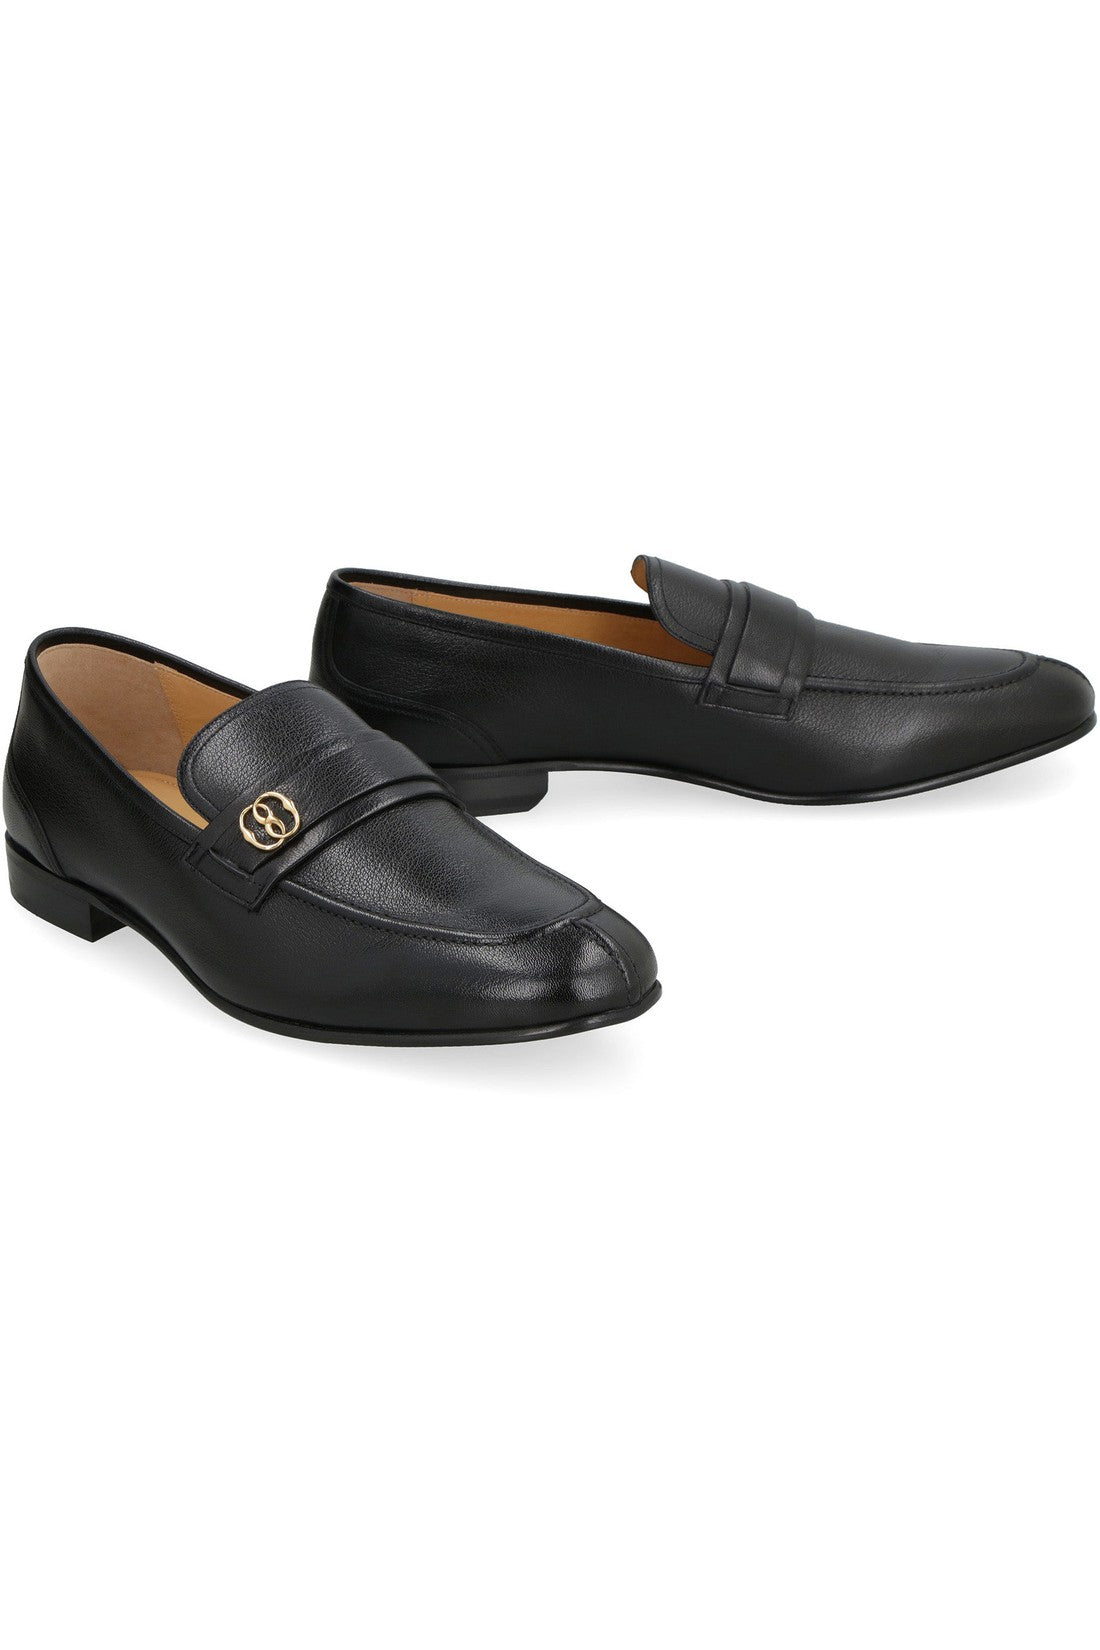 Bally-OUTLET-SALE-Sadei leather loafers-ARCHIVIST